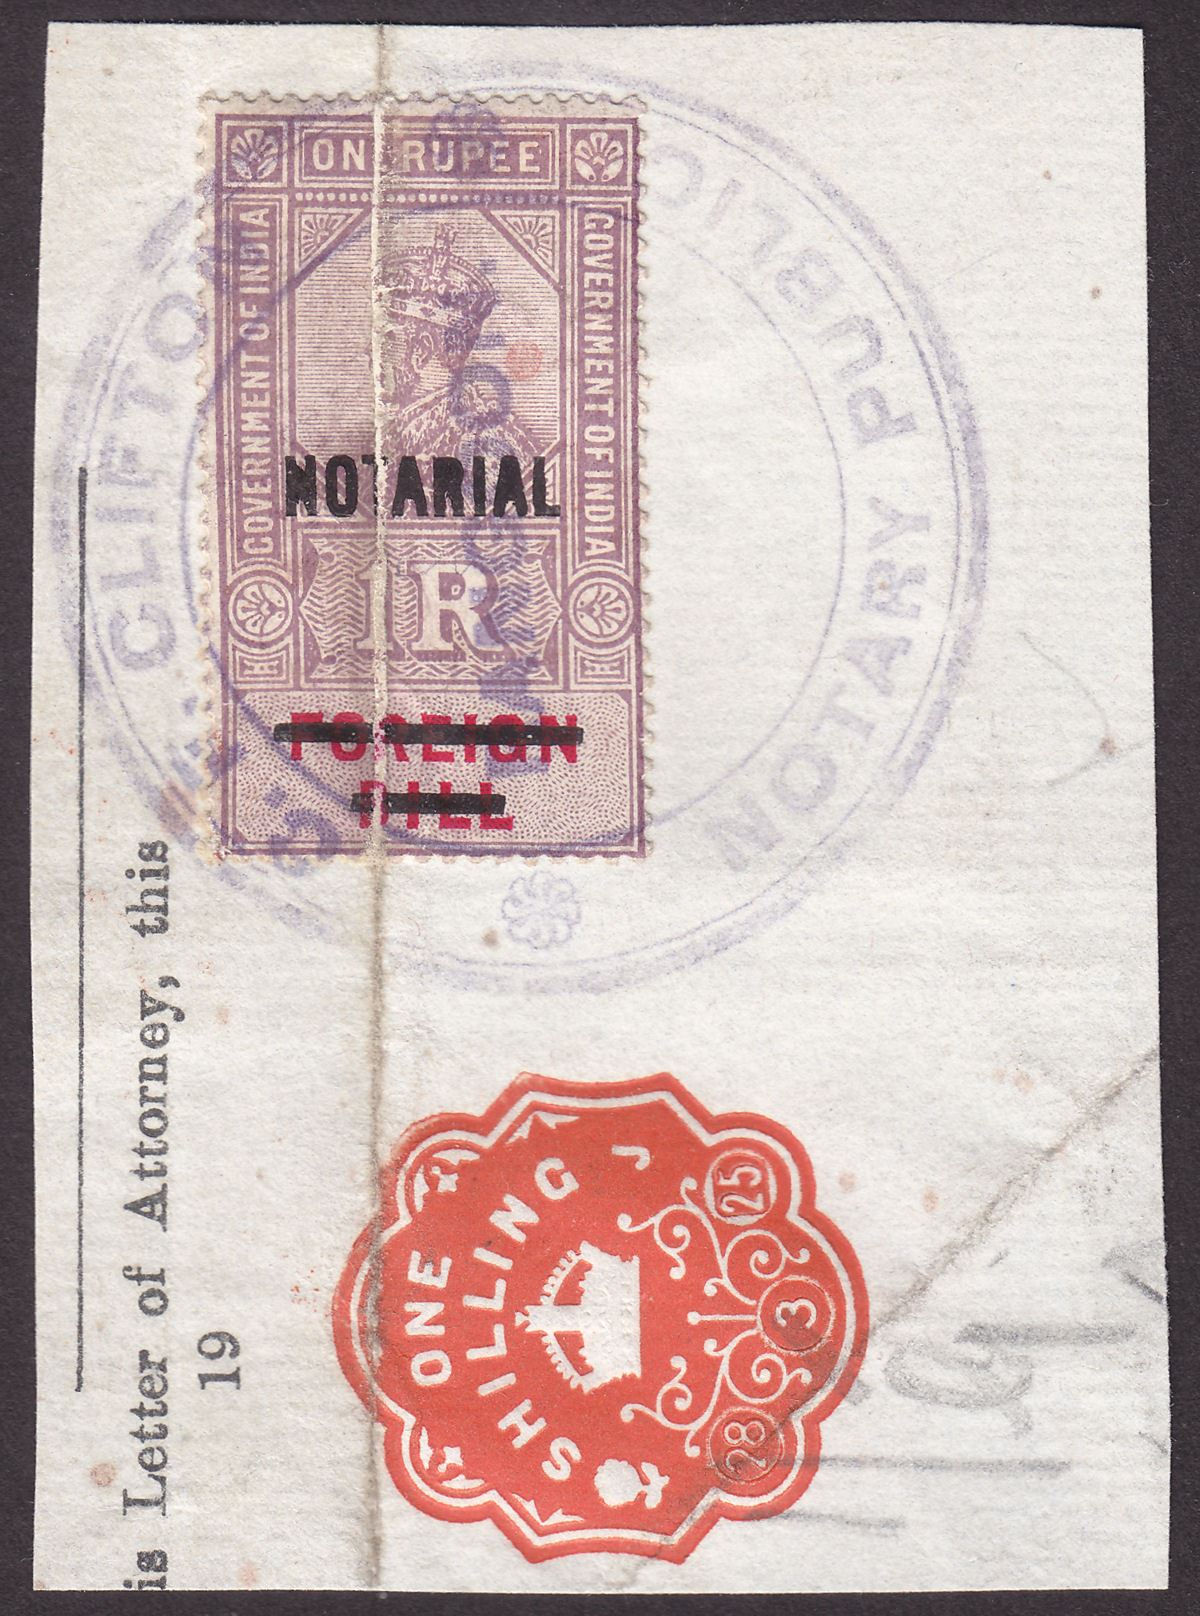 India 1923 KGV Revenue Notarial Overprint on Foreign Bill 1r Used on Piece BF35